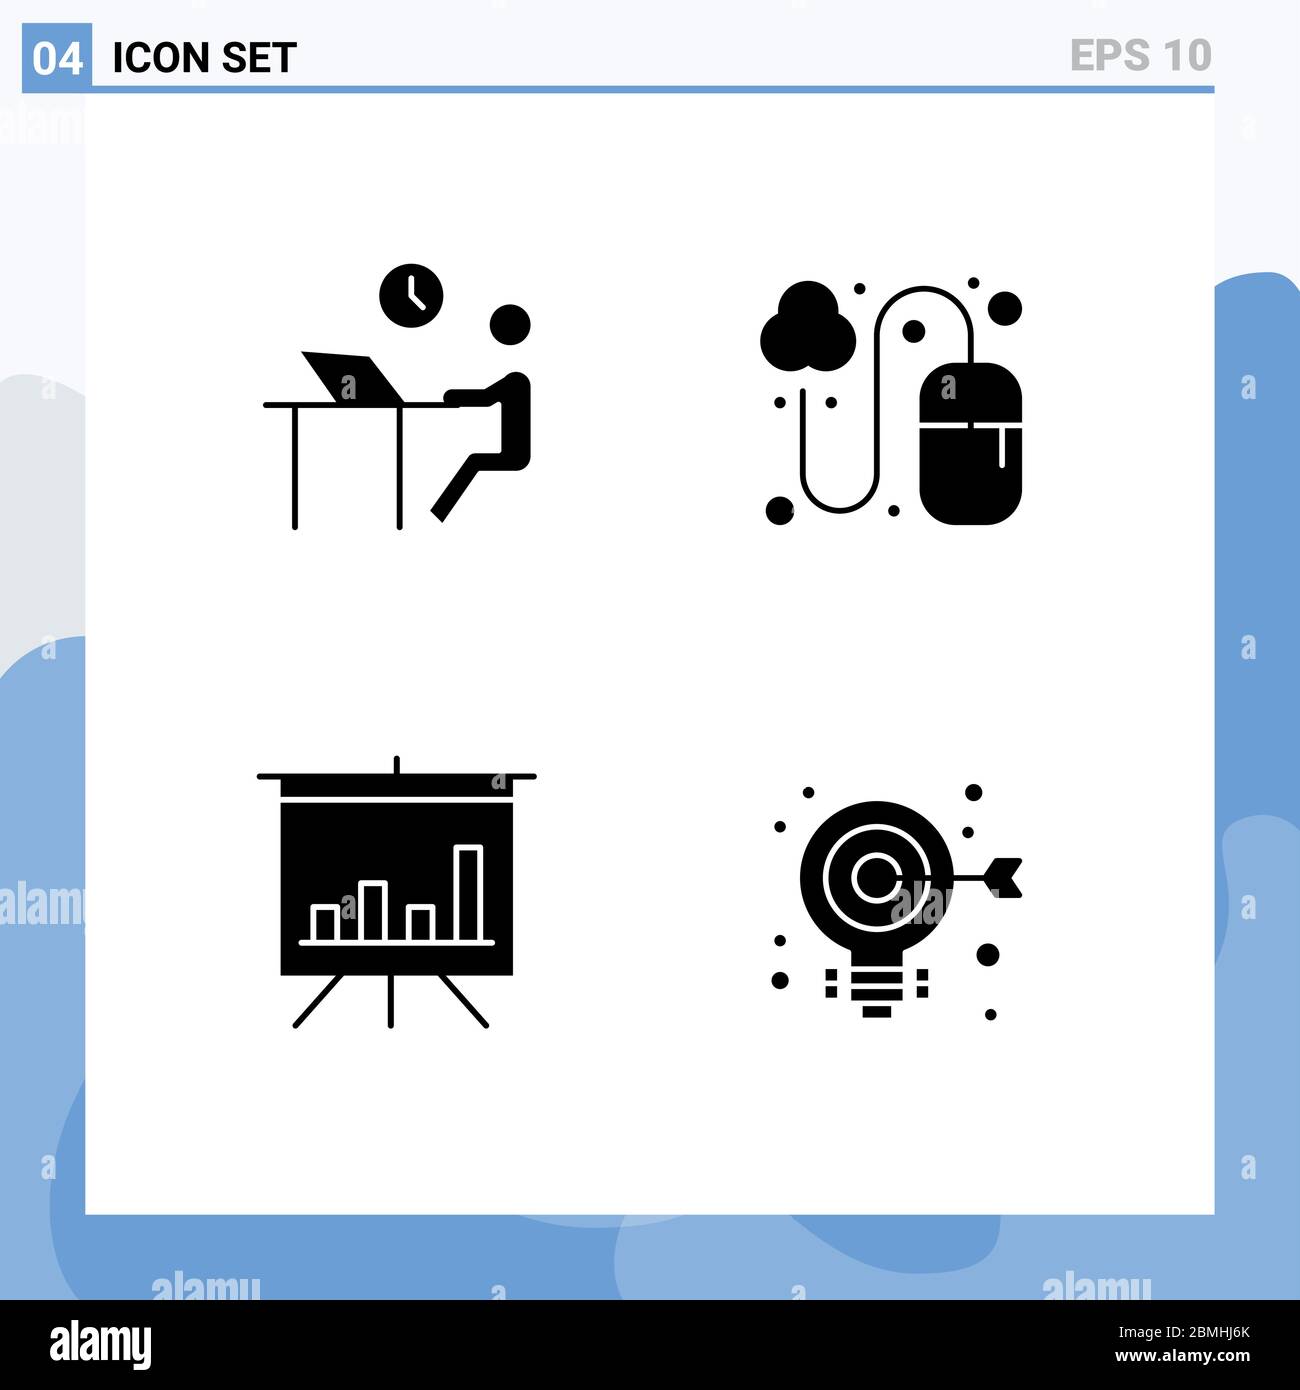 People Analysing Stats and Data in Visual Form Stock Vector - Illustration  of attracting, documentation: 173854319